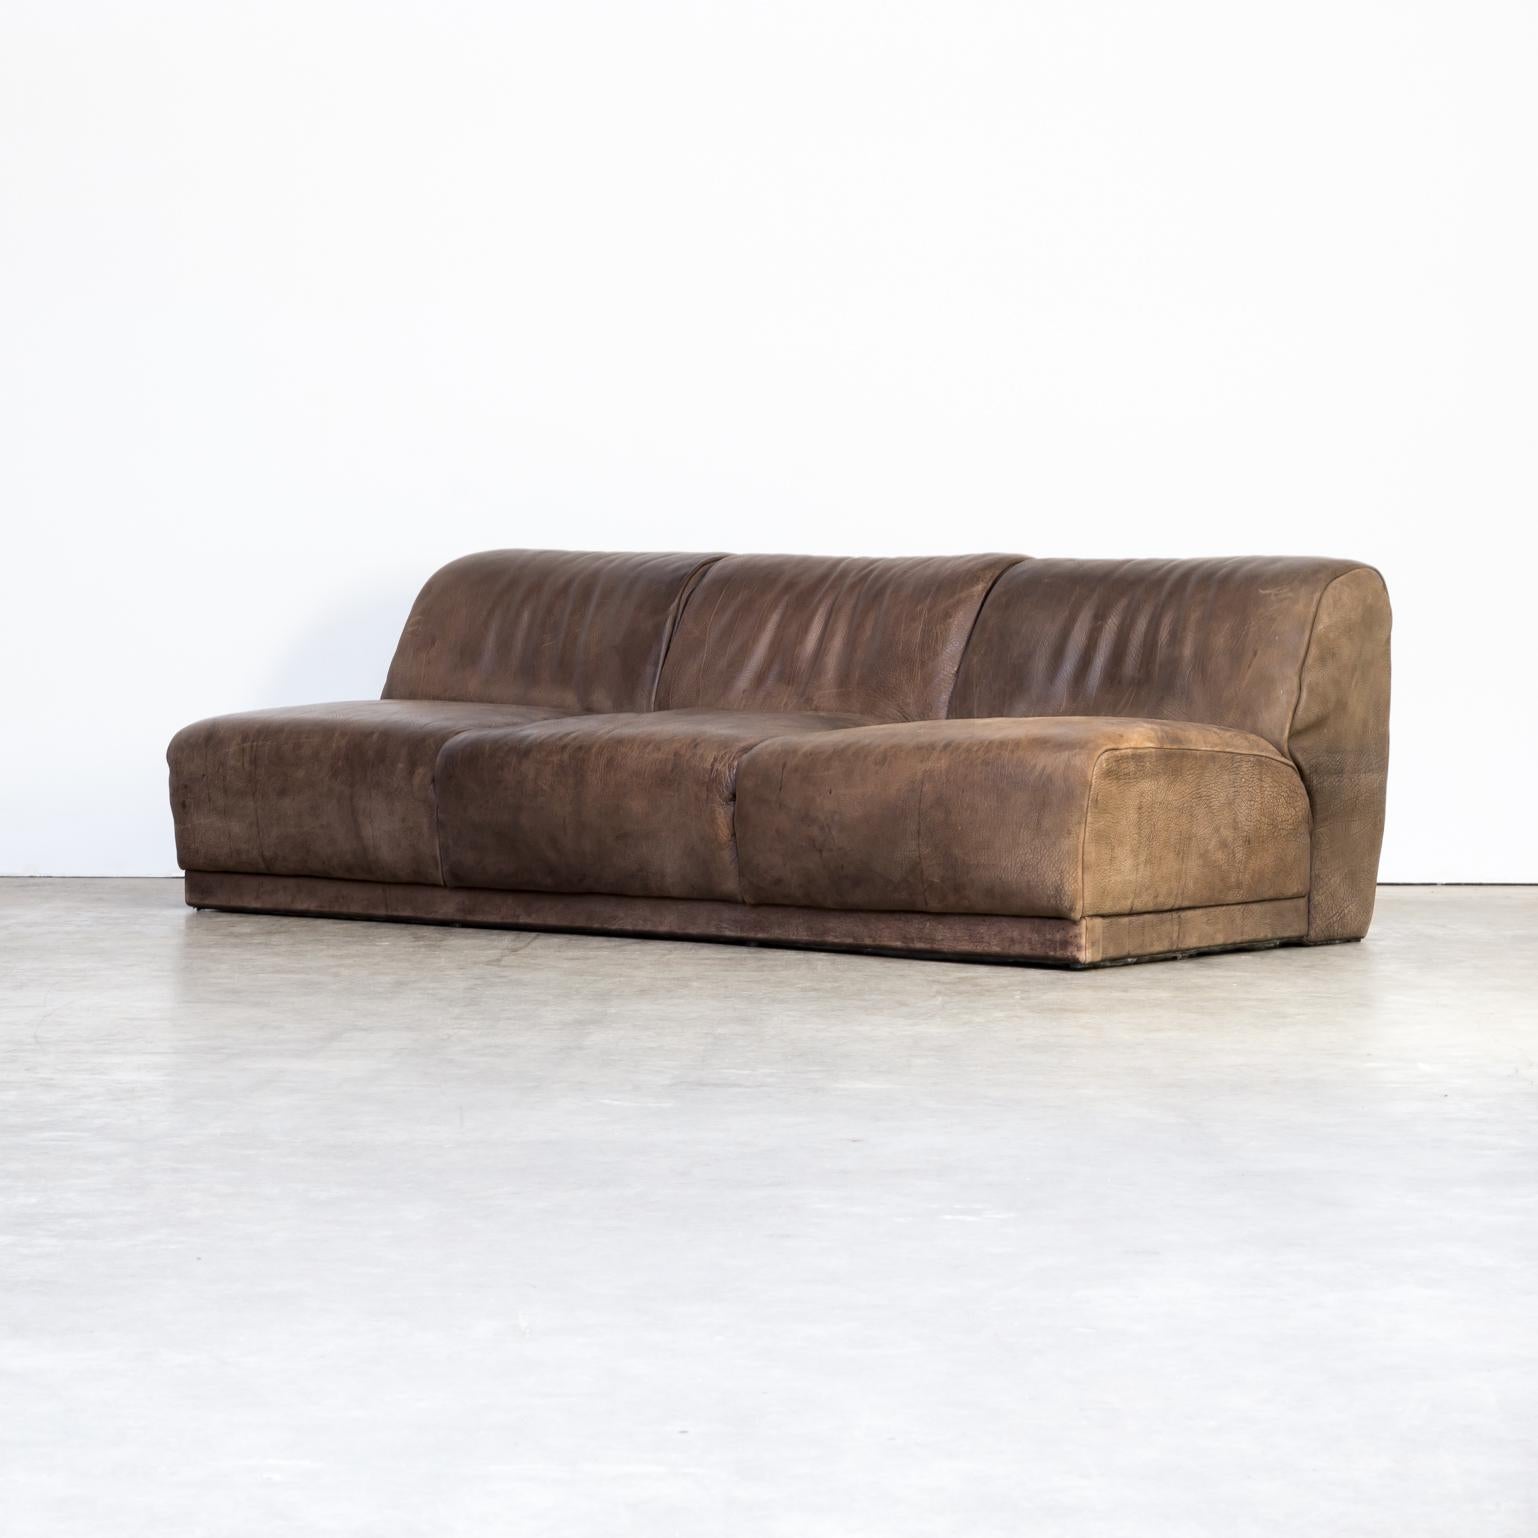 1970s neck leather sofa in the style of De Sede. Sofa in good condition, strong leather, wear consistent with age and use.